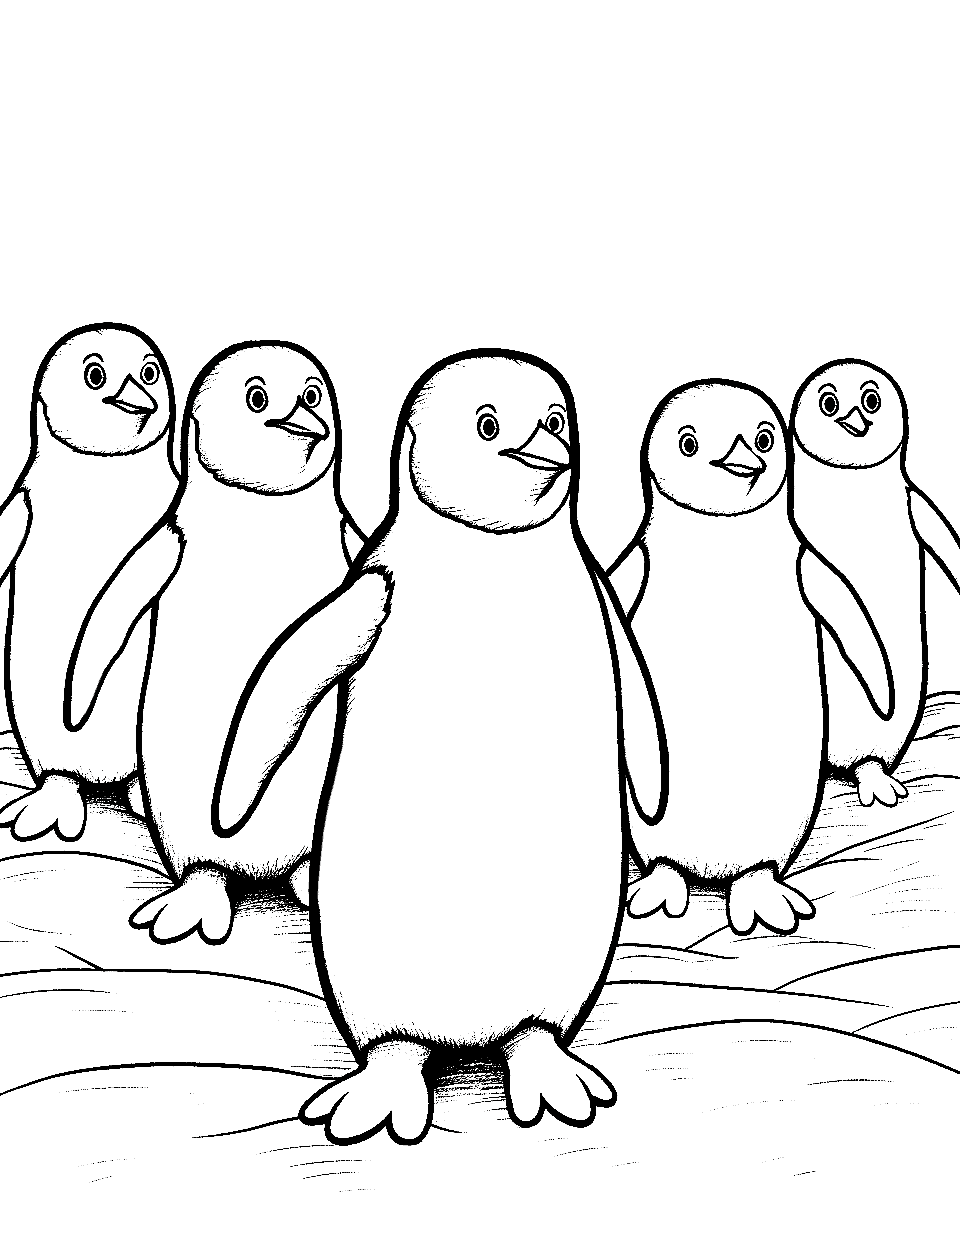 Small Penguin Parade Coloring Page - A group of small penguins marching across the ice.